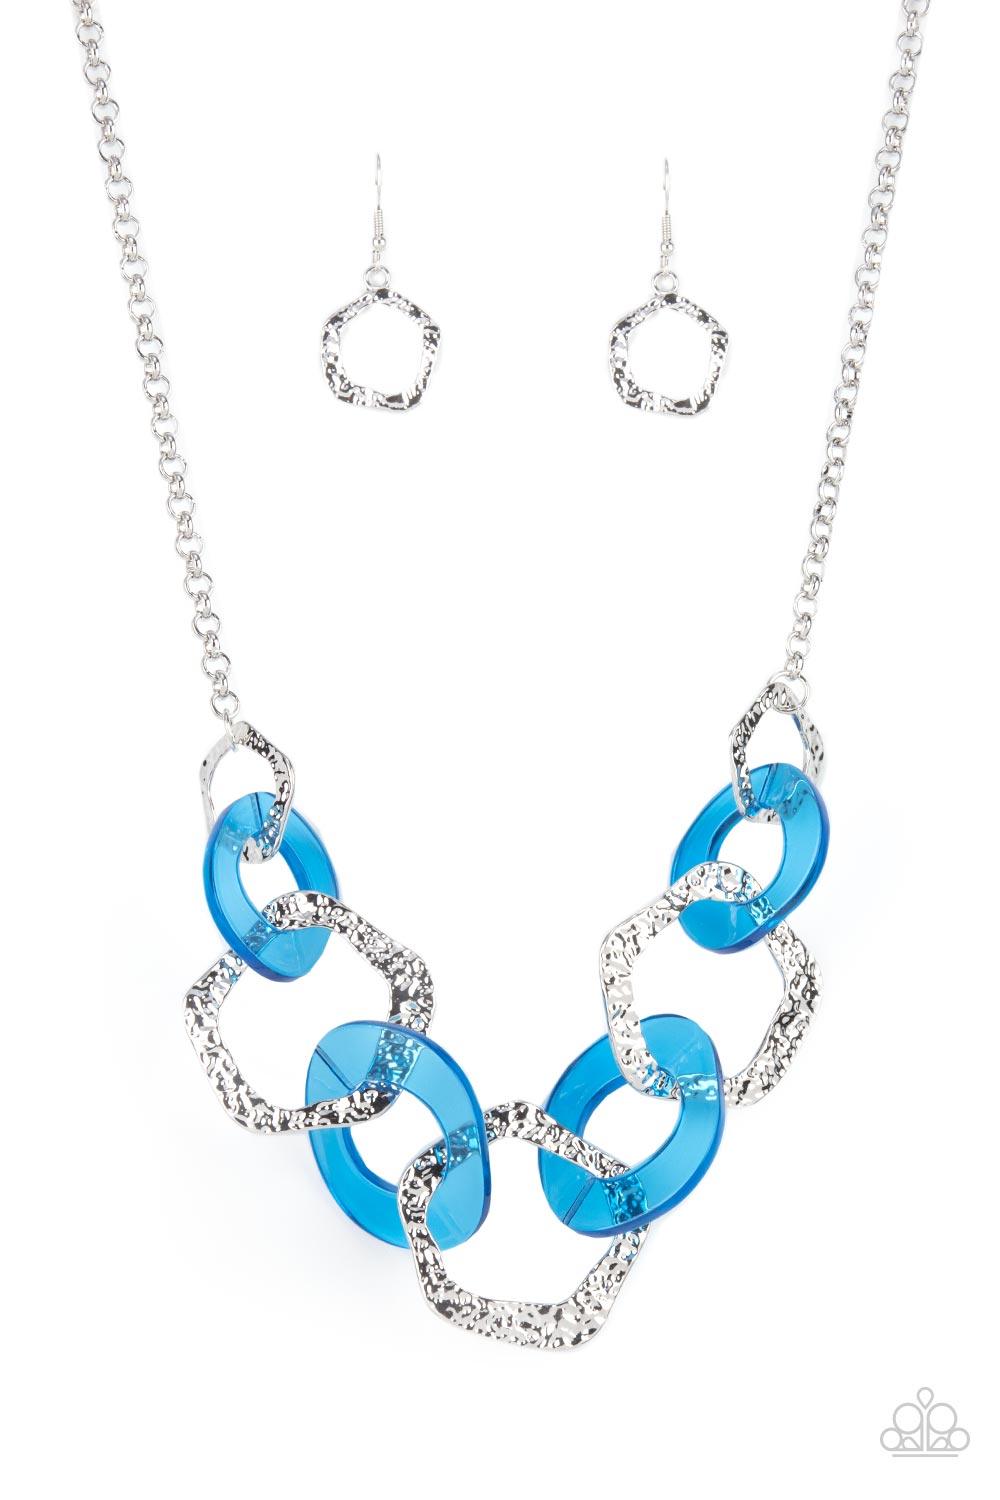 Paparazzi Accessories Urban Circus - Blue An asymmetrical assortment of neon blue acrylic rings and hammered silver hoops boldly interlock below the collar, creating an intense pop of color. Features an adjustable clasp closure. Sold as one individual nec